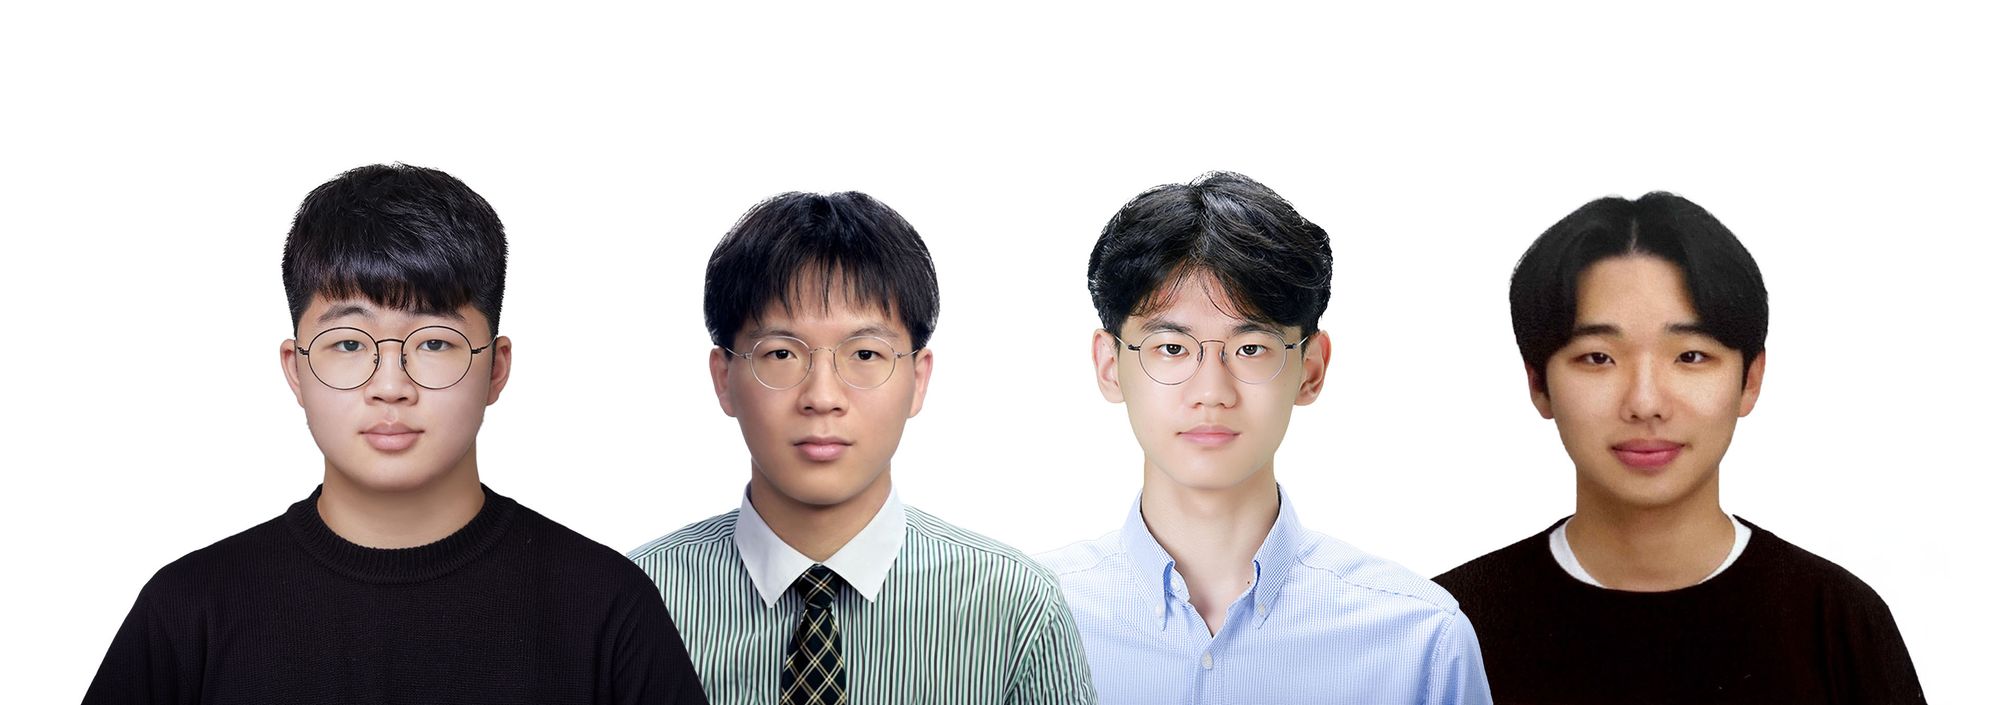 231129 researcher AH - Young cryptographers solved problems together, winning national award